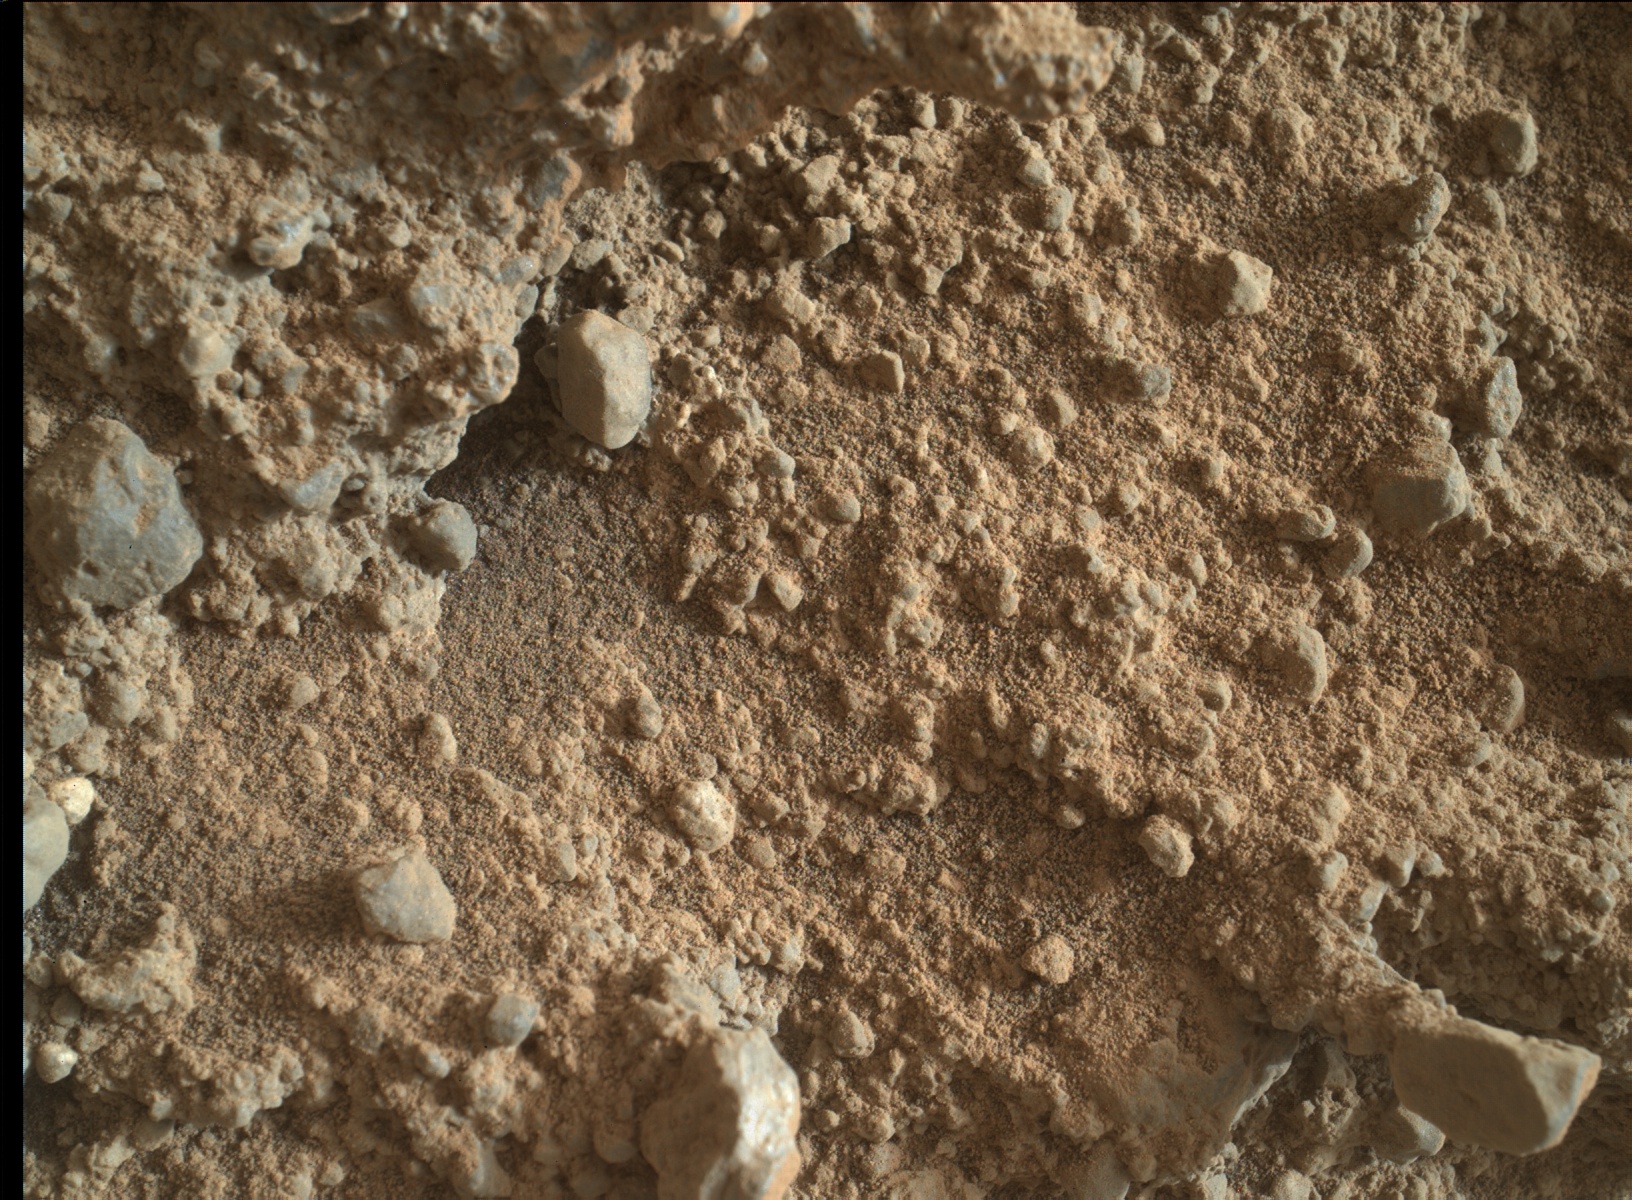 Nasa's Mars rover Curiosity acquired this image using its Mars Hand Lens Imager (MAHLI) on Sol 400